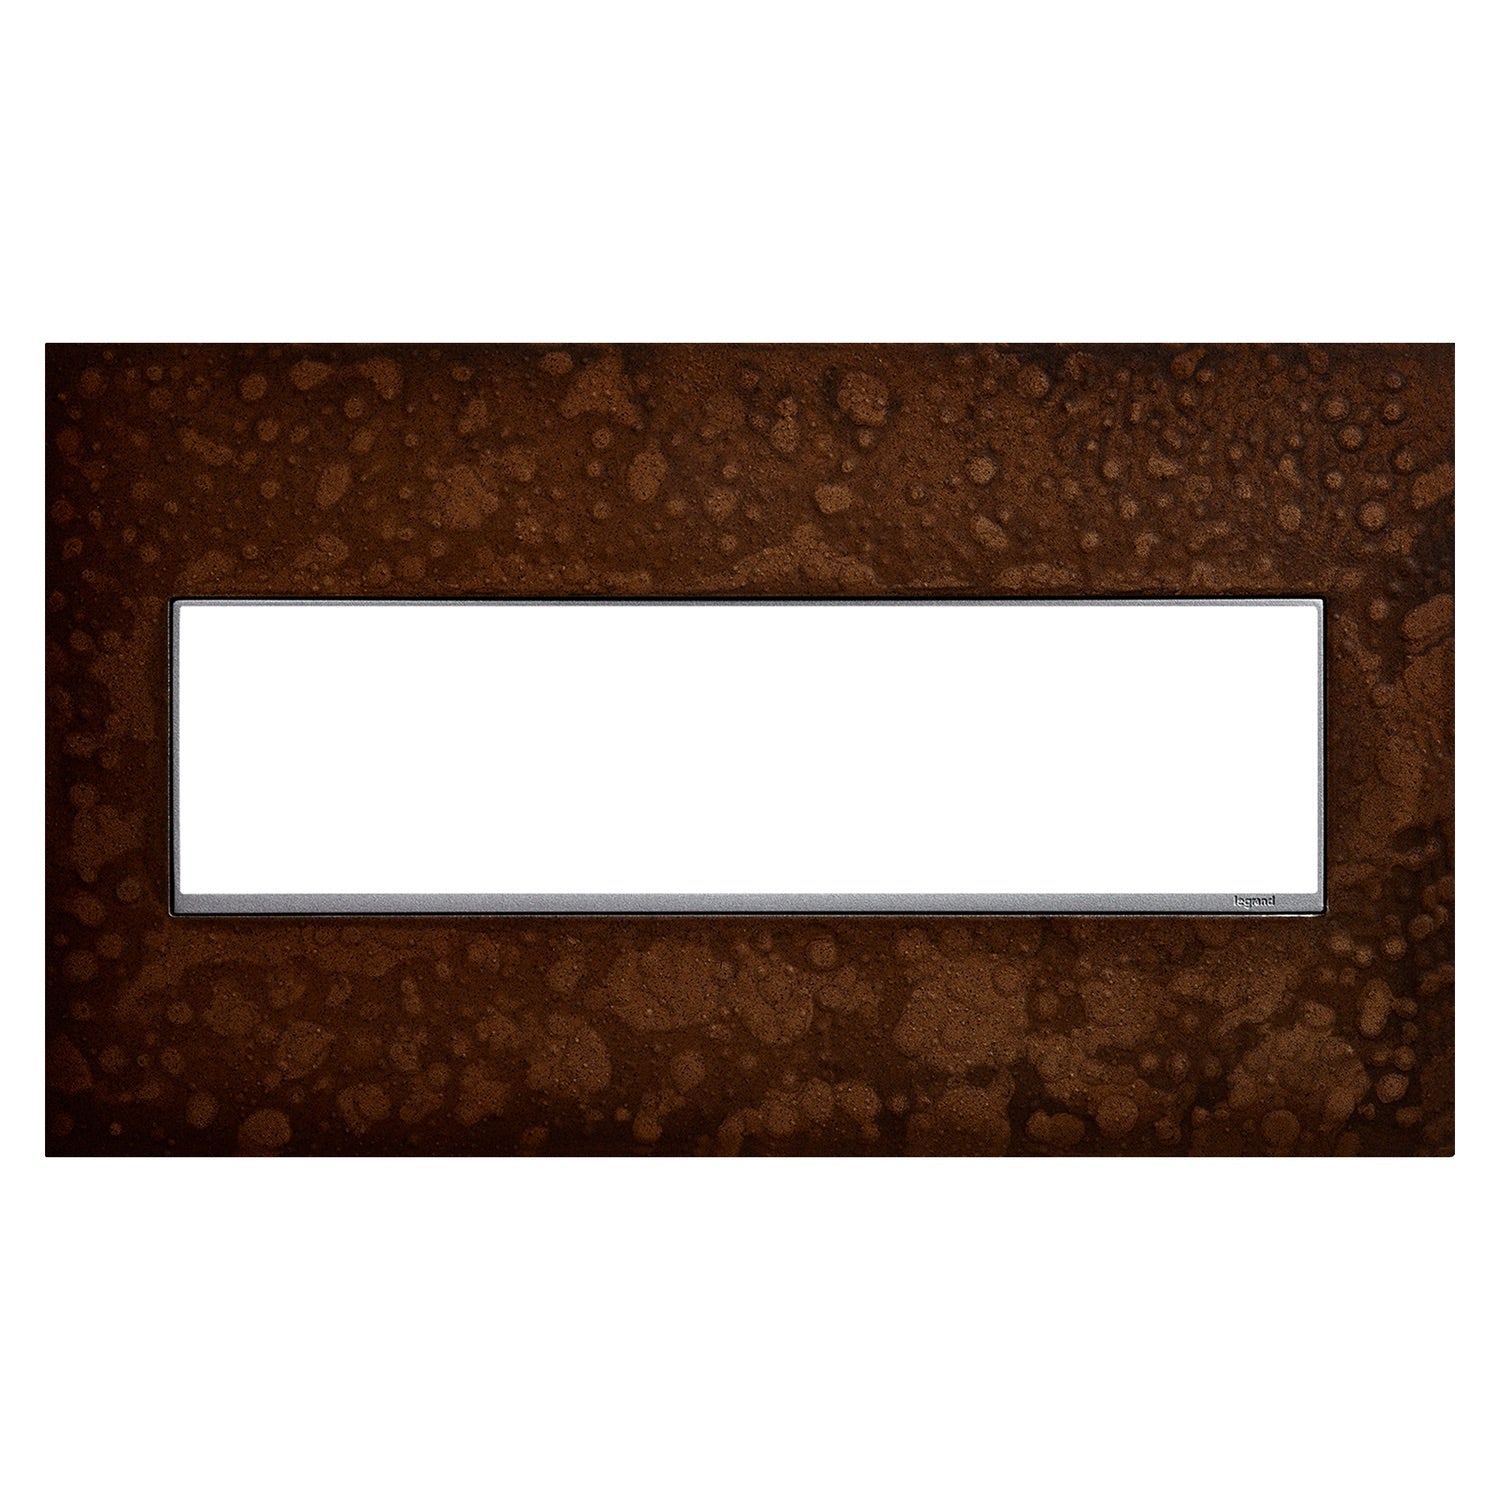 4-Gang Wall Plate in Hubbardton Forge Bronze